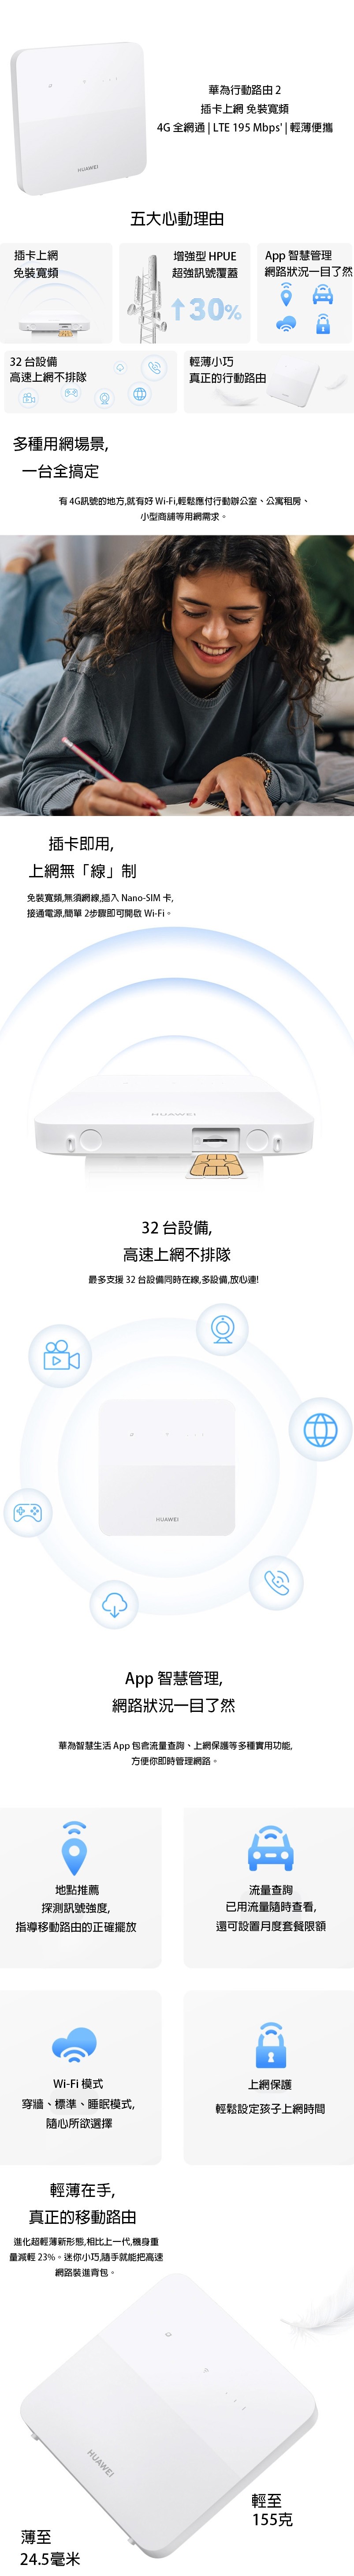 Huawei mobile router 2